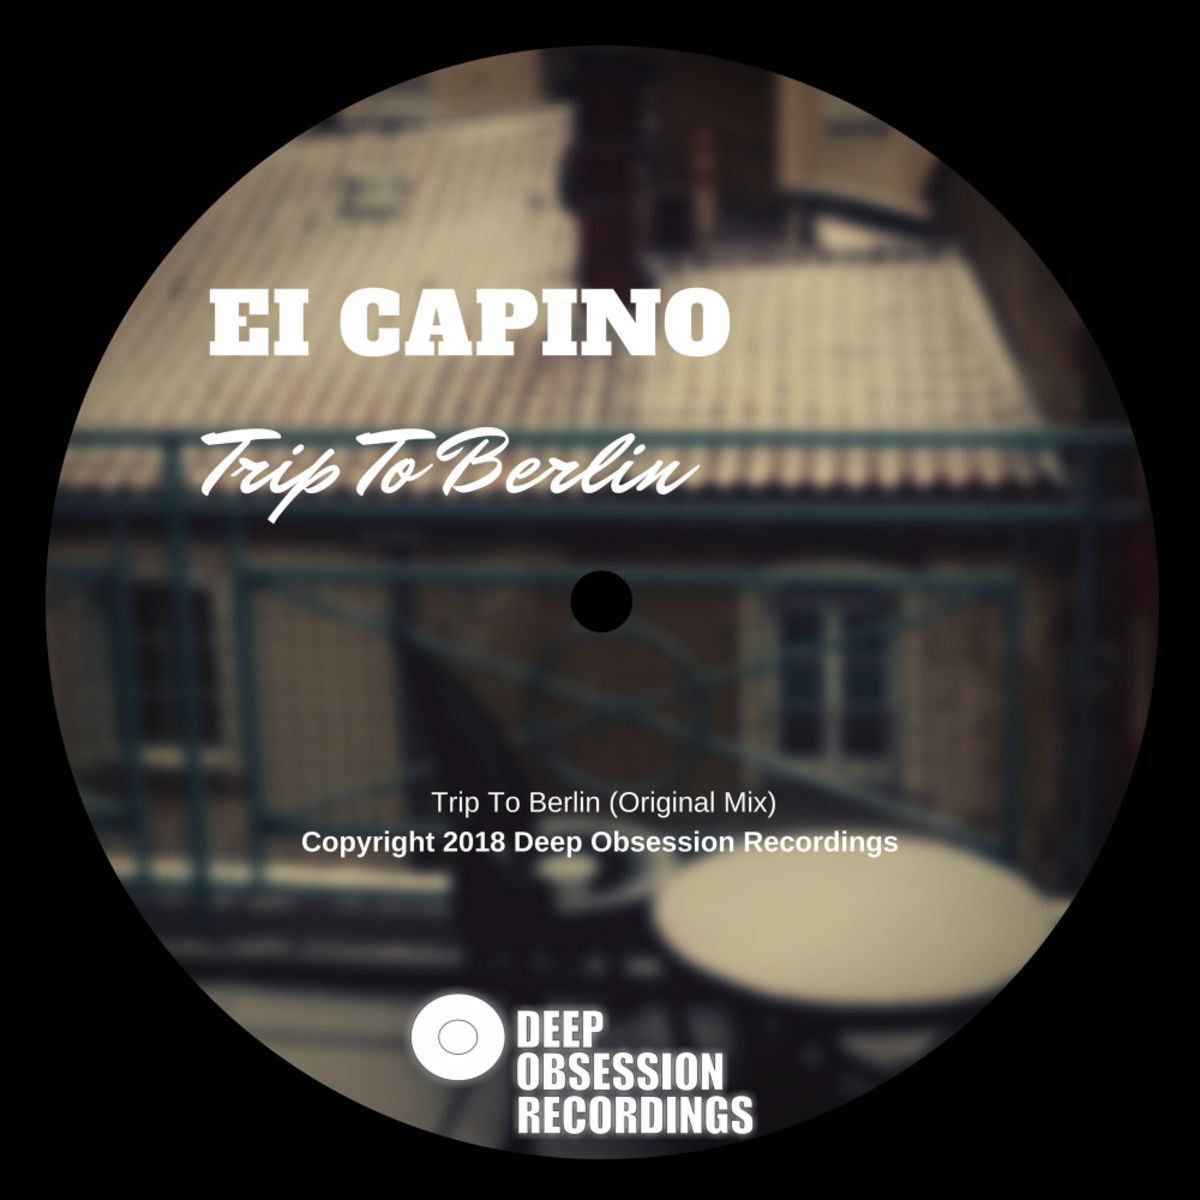 Ei Capino - Trip To Berlin / Deep Obsession Recordings